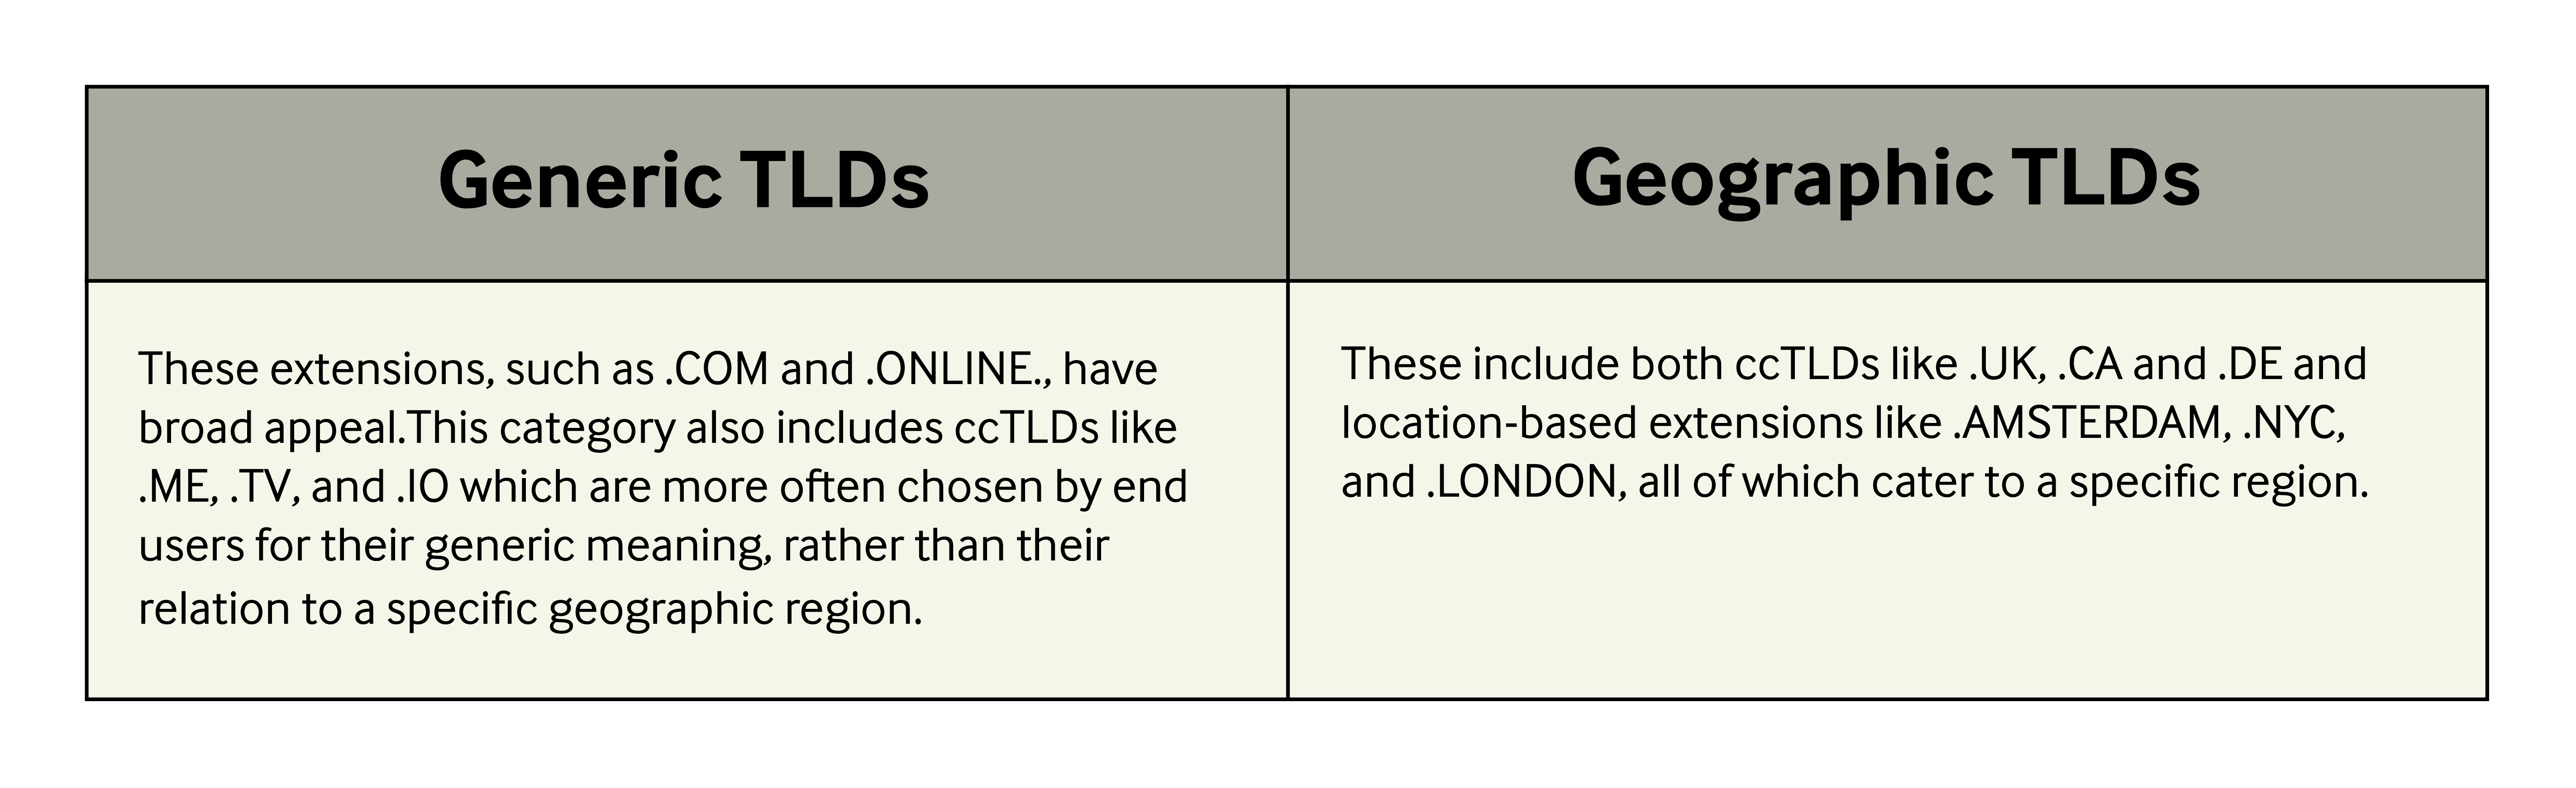 Difference between Generic and Geographic TLDs